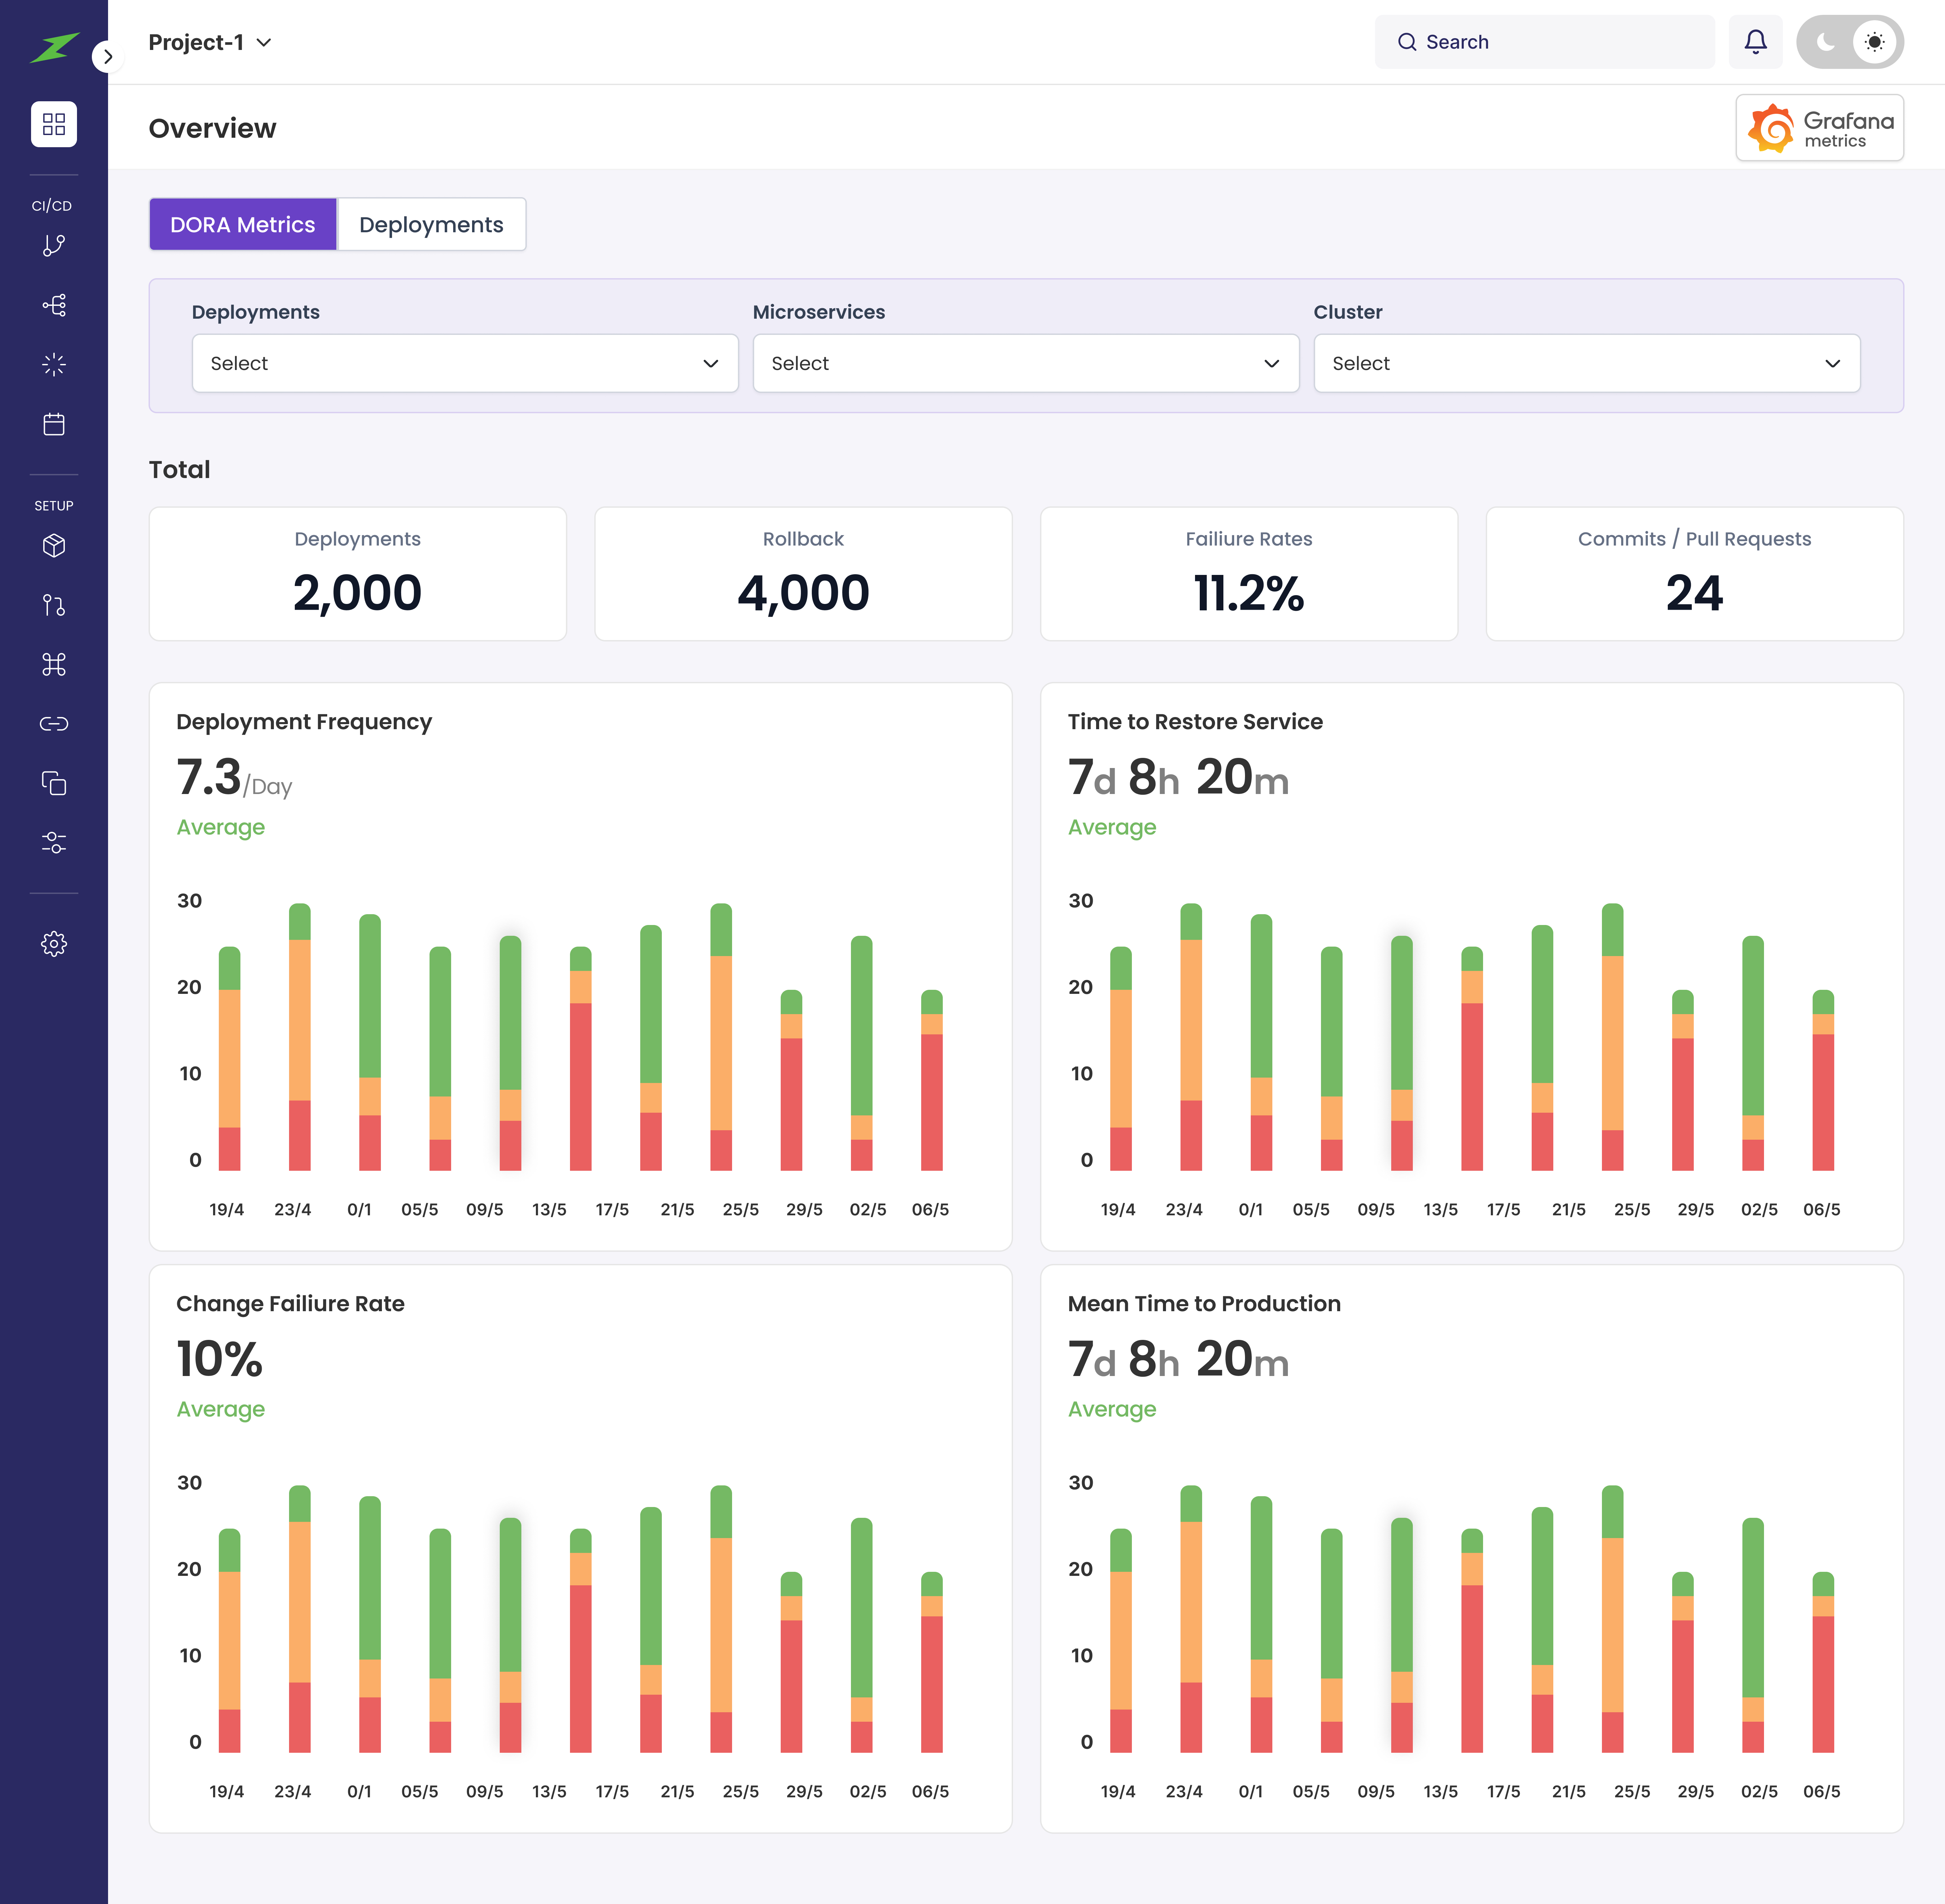 Analytics dashboard - DORA and related metrics across deployments and projects.